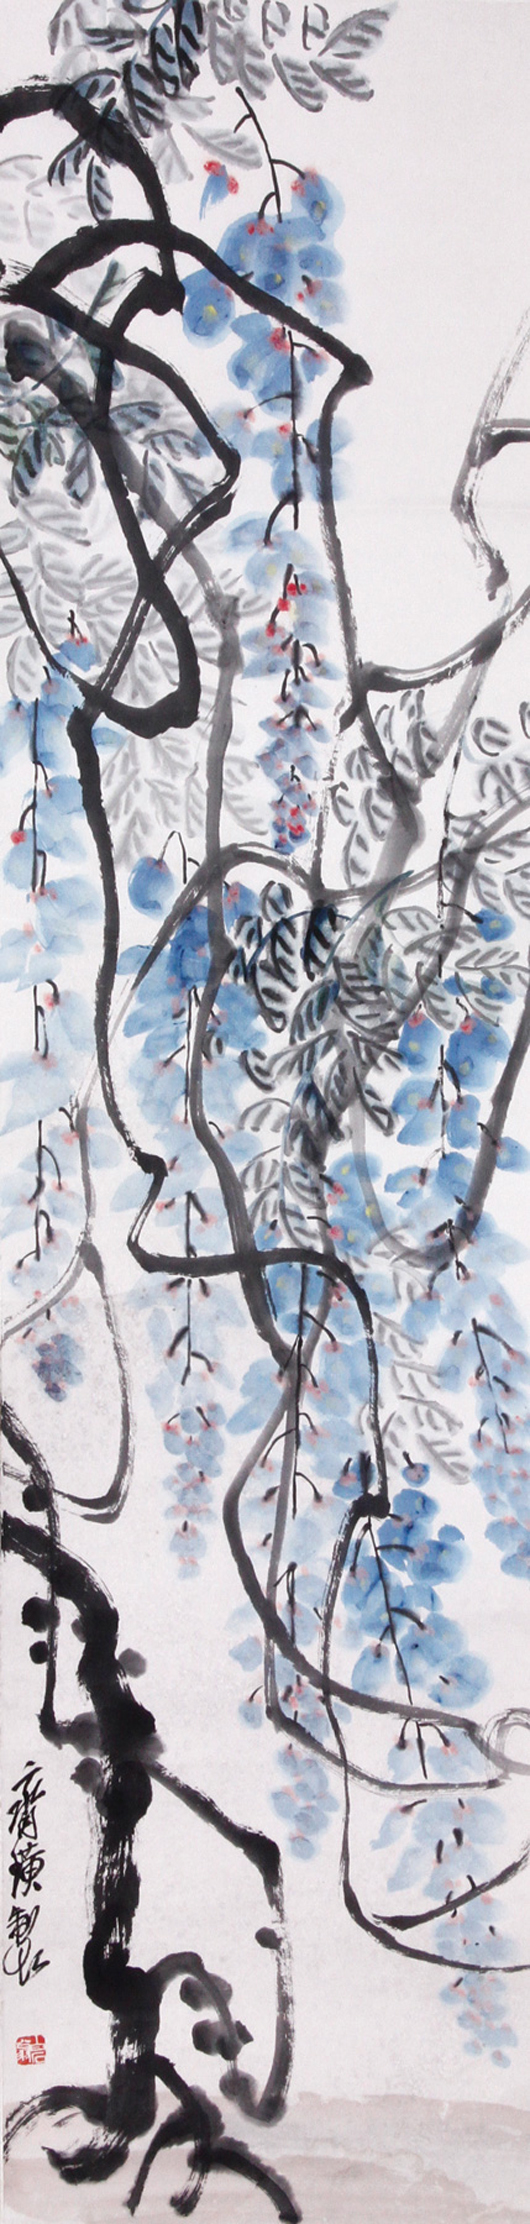 Chinese 20th century painting, ink and color on paper, signed and sealed Qi Baishi (1864-1957), 53 1/4 inches x 13 inches. Water stains at bottom. Sold For $410,000. Image courtesy Kaminski Auctions. 